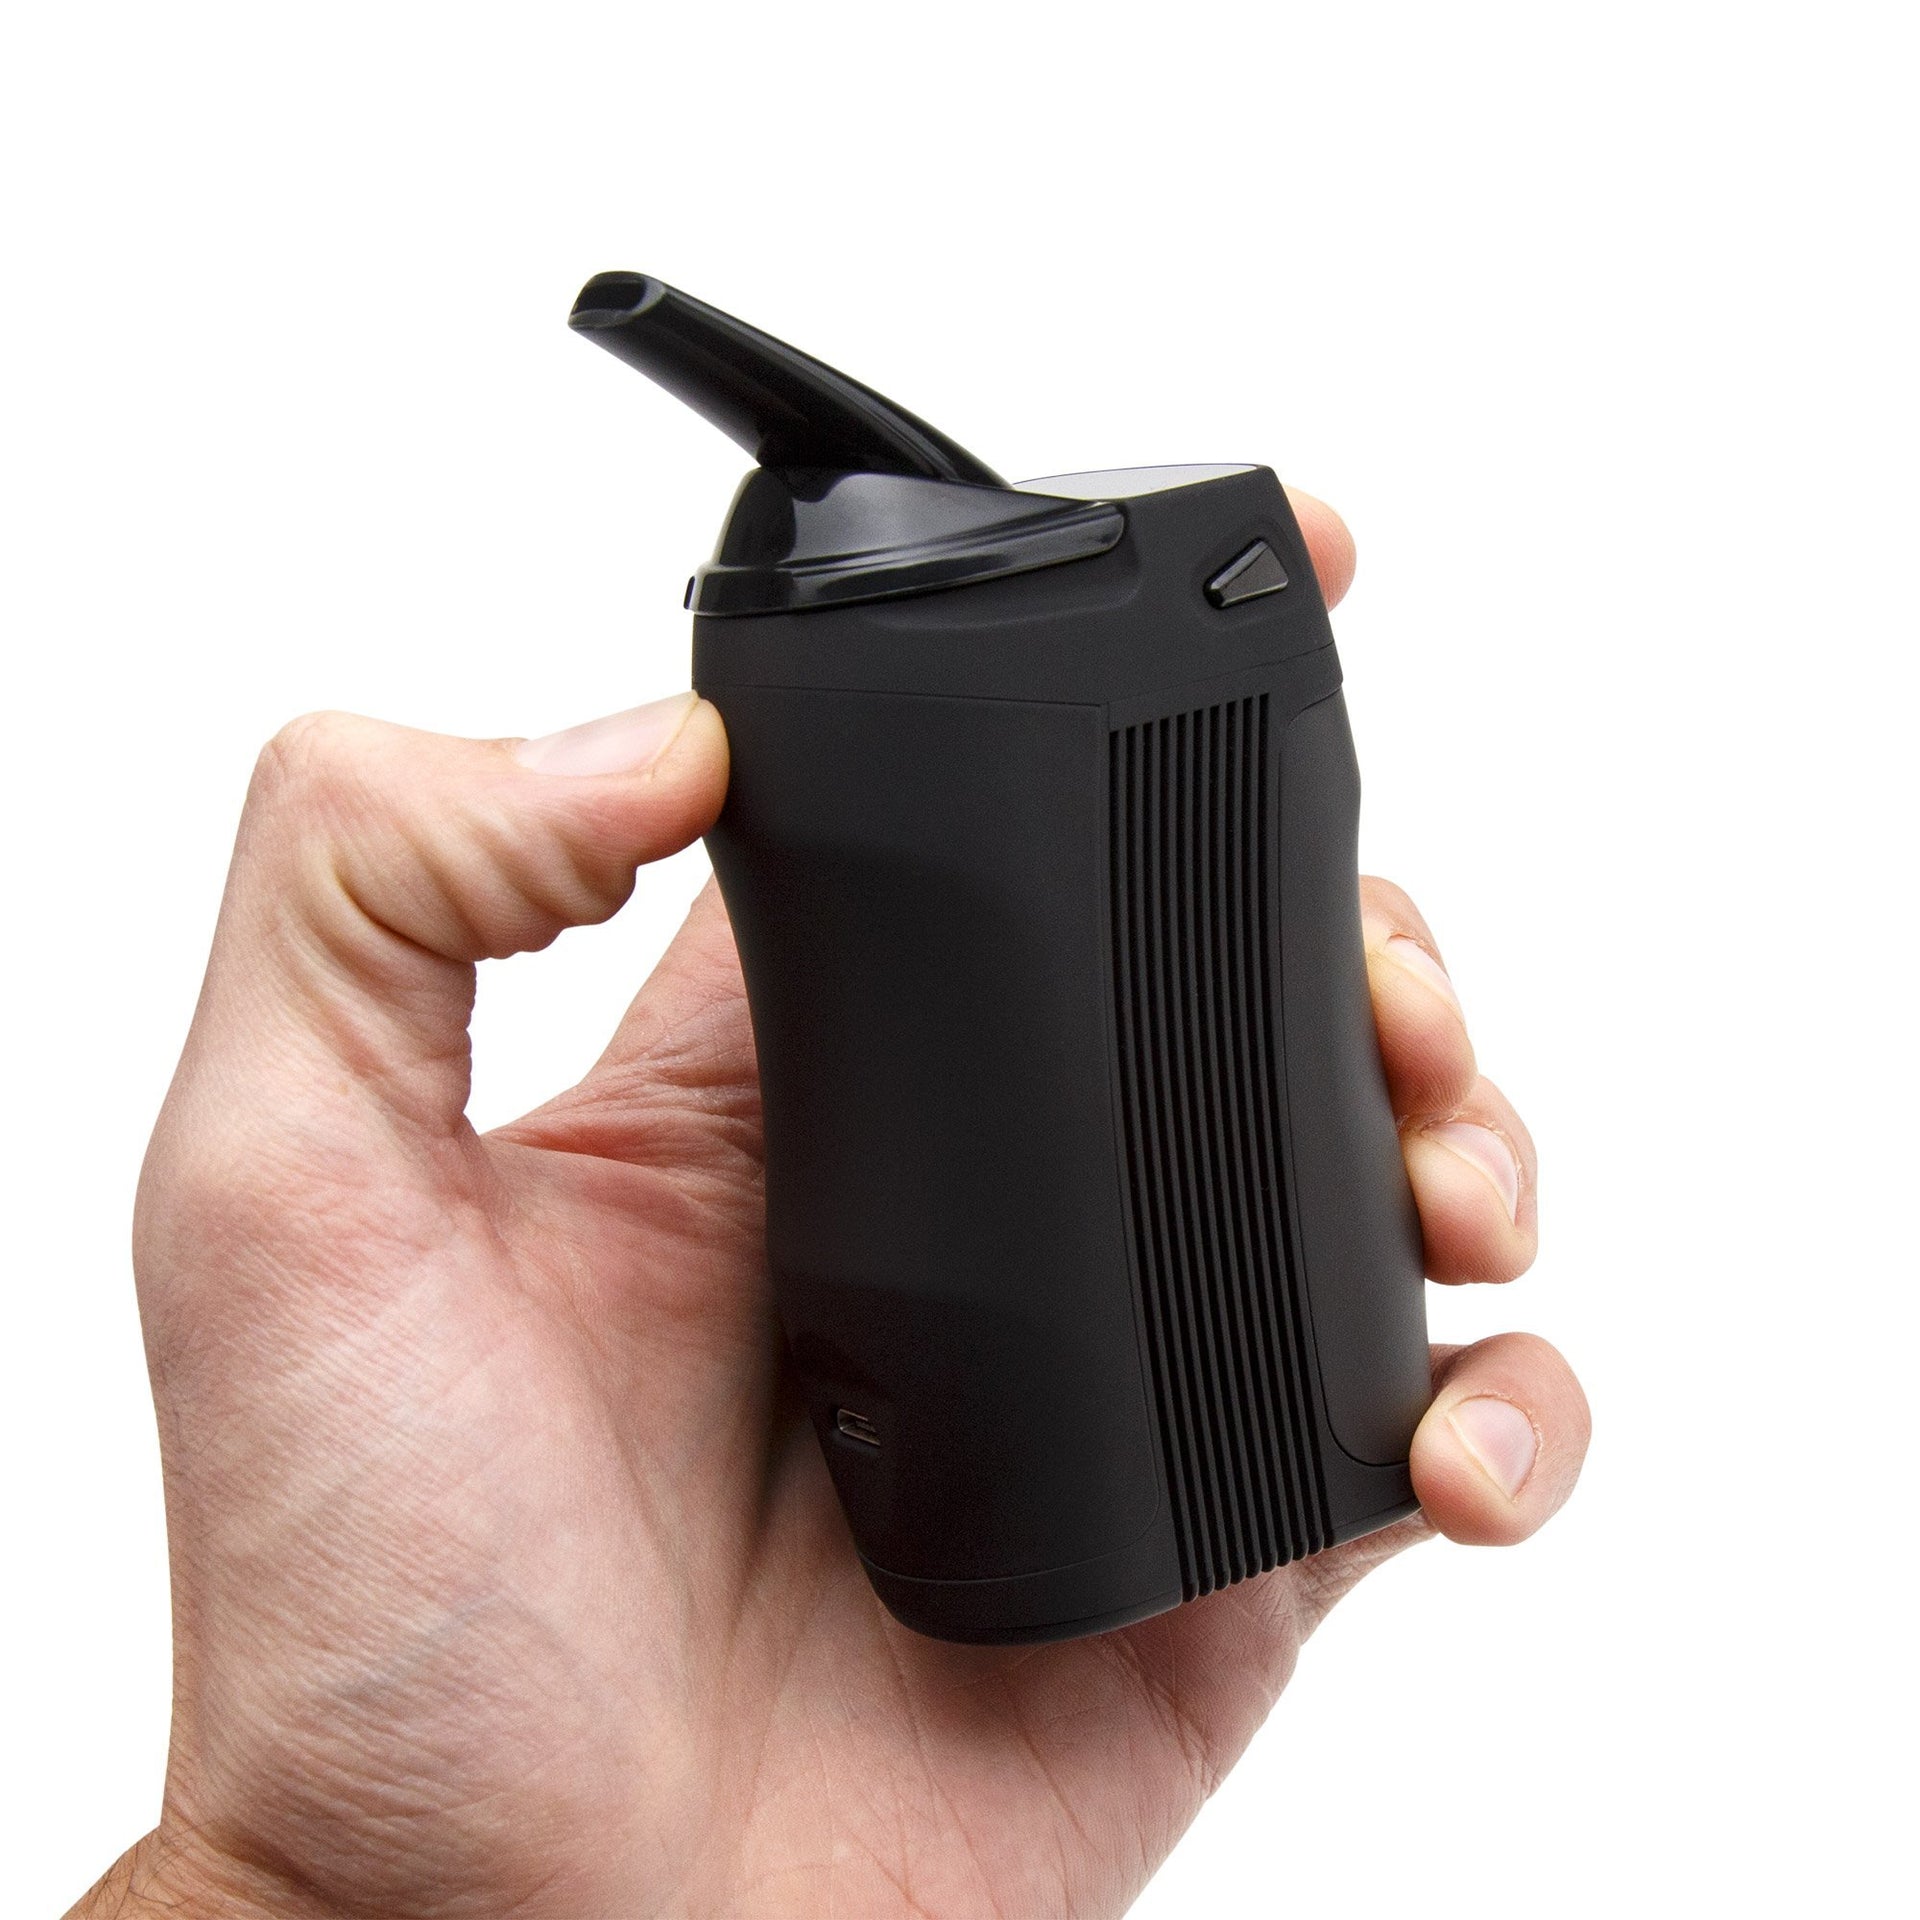 Boundless Tera Vaporizer - 420 Science - The most trusted online smoke shop.